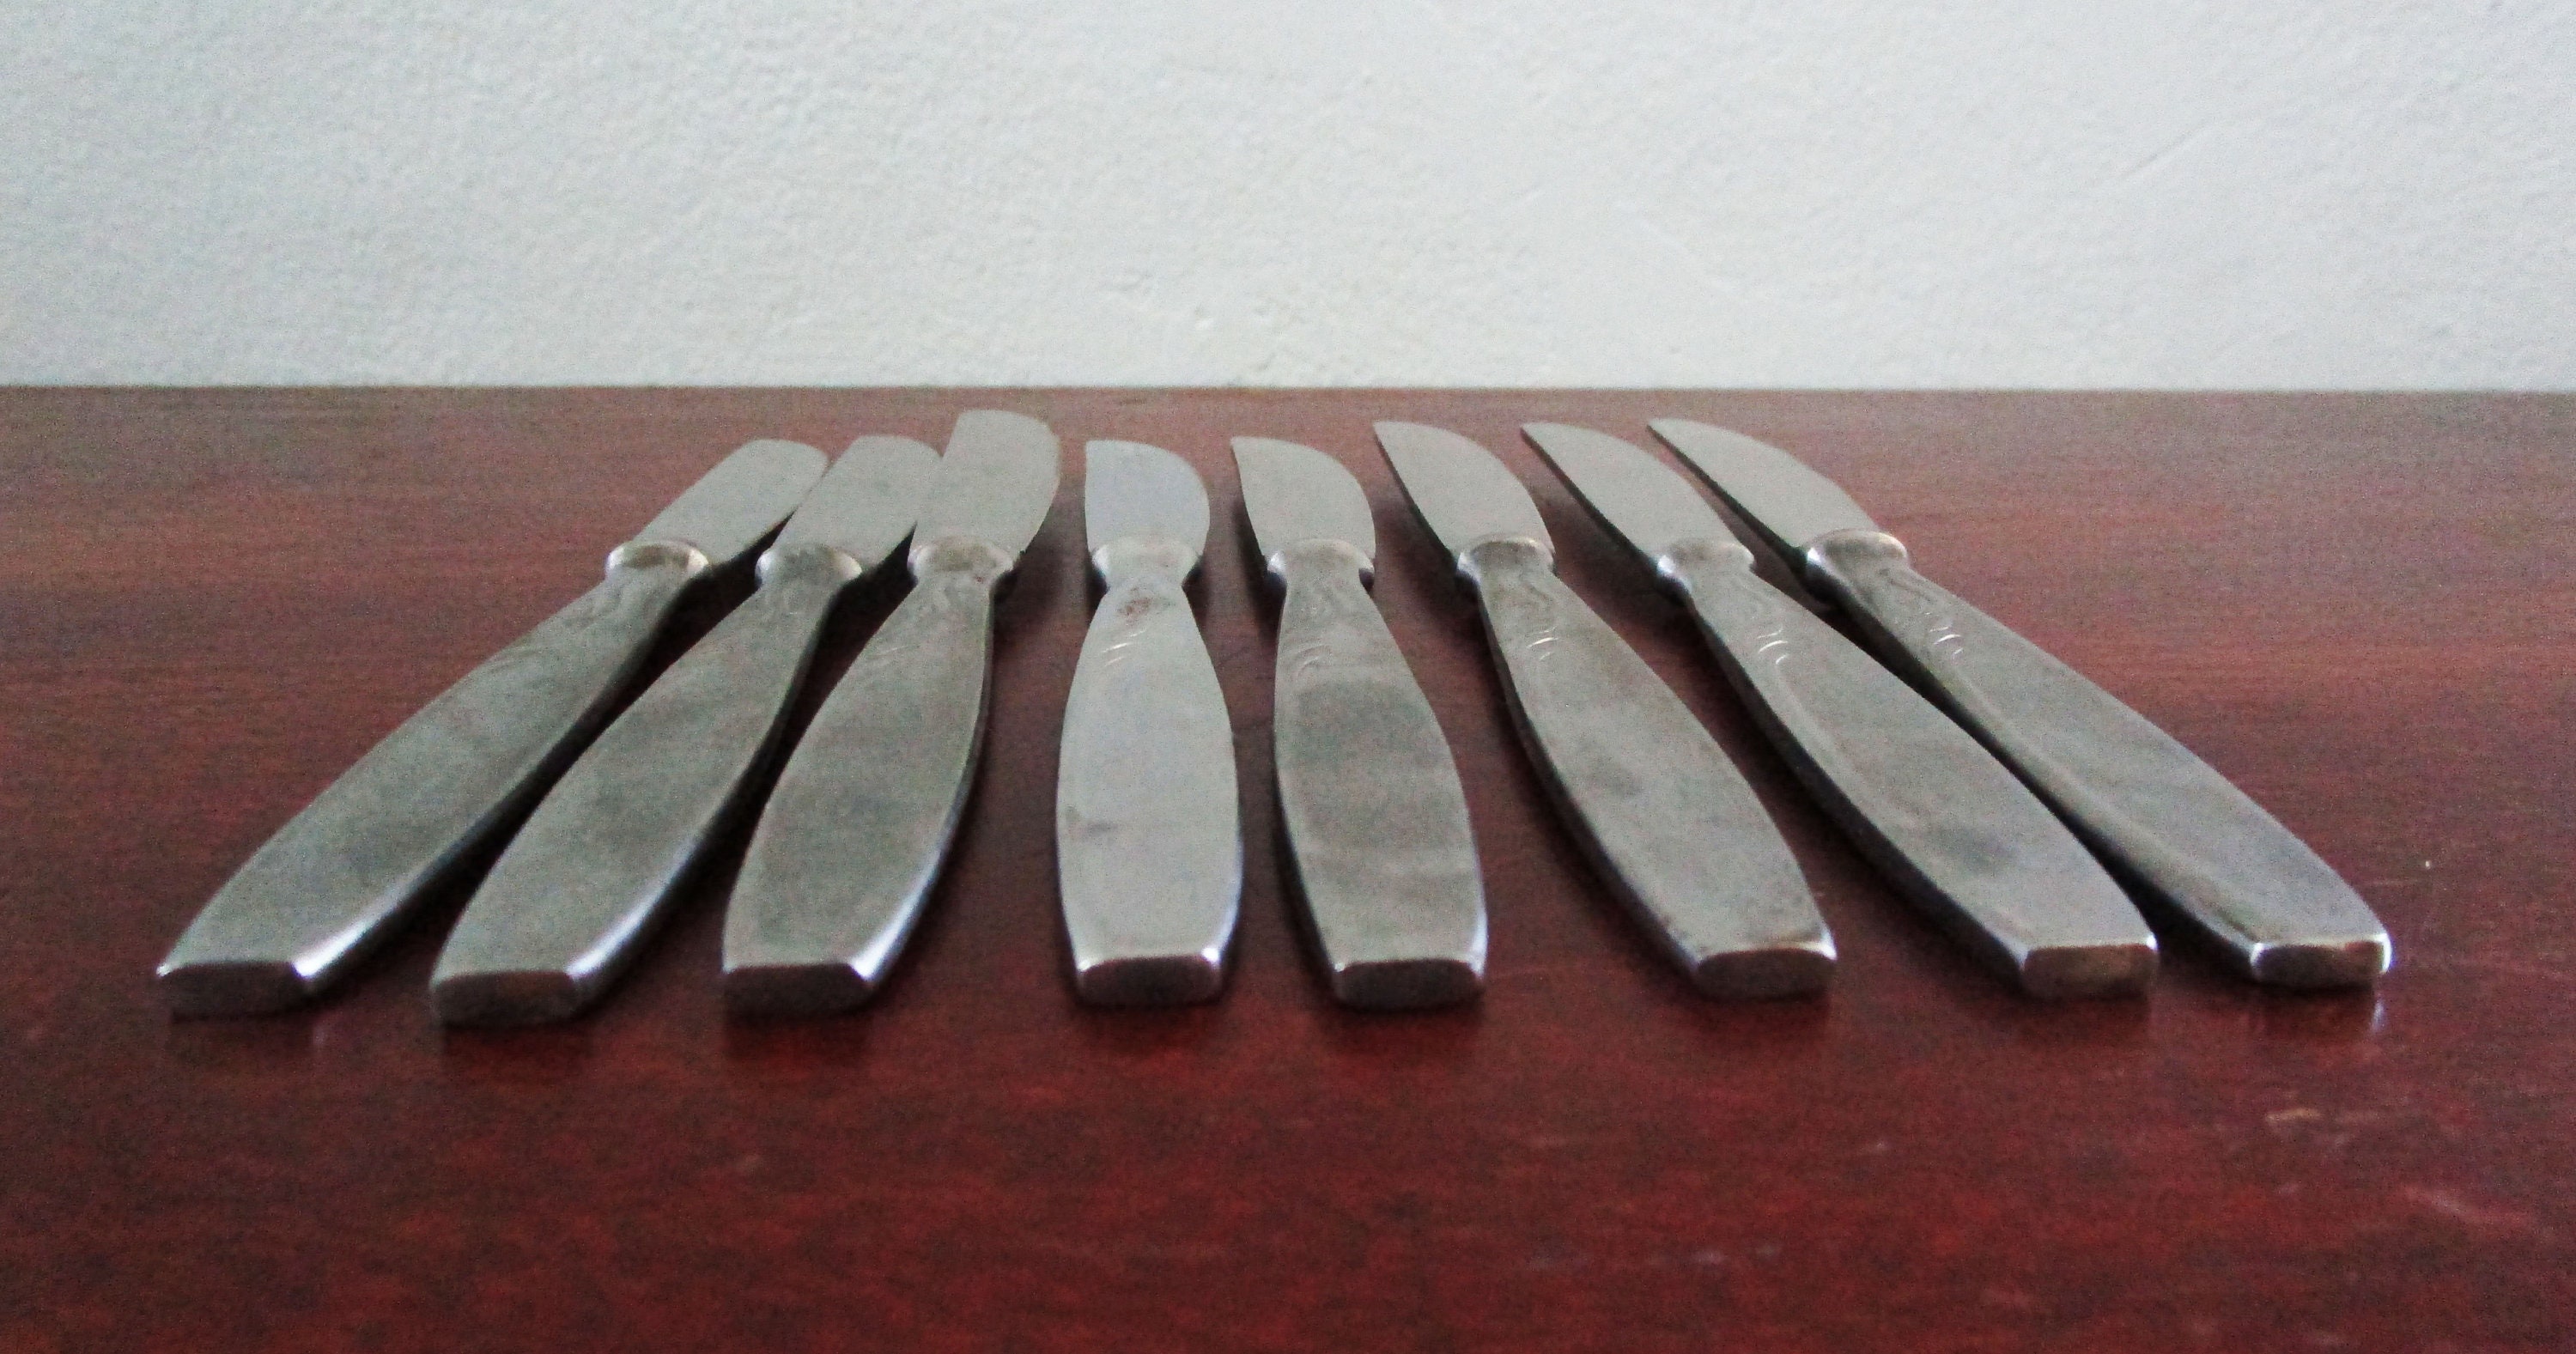 ROSTFREI Vintage Germany Silver Plated Dinner Knives Set of Six 8